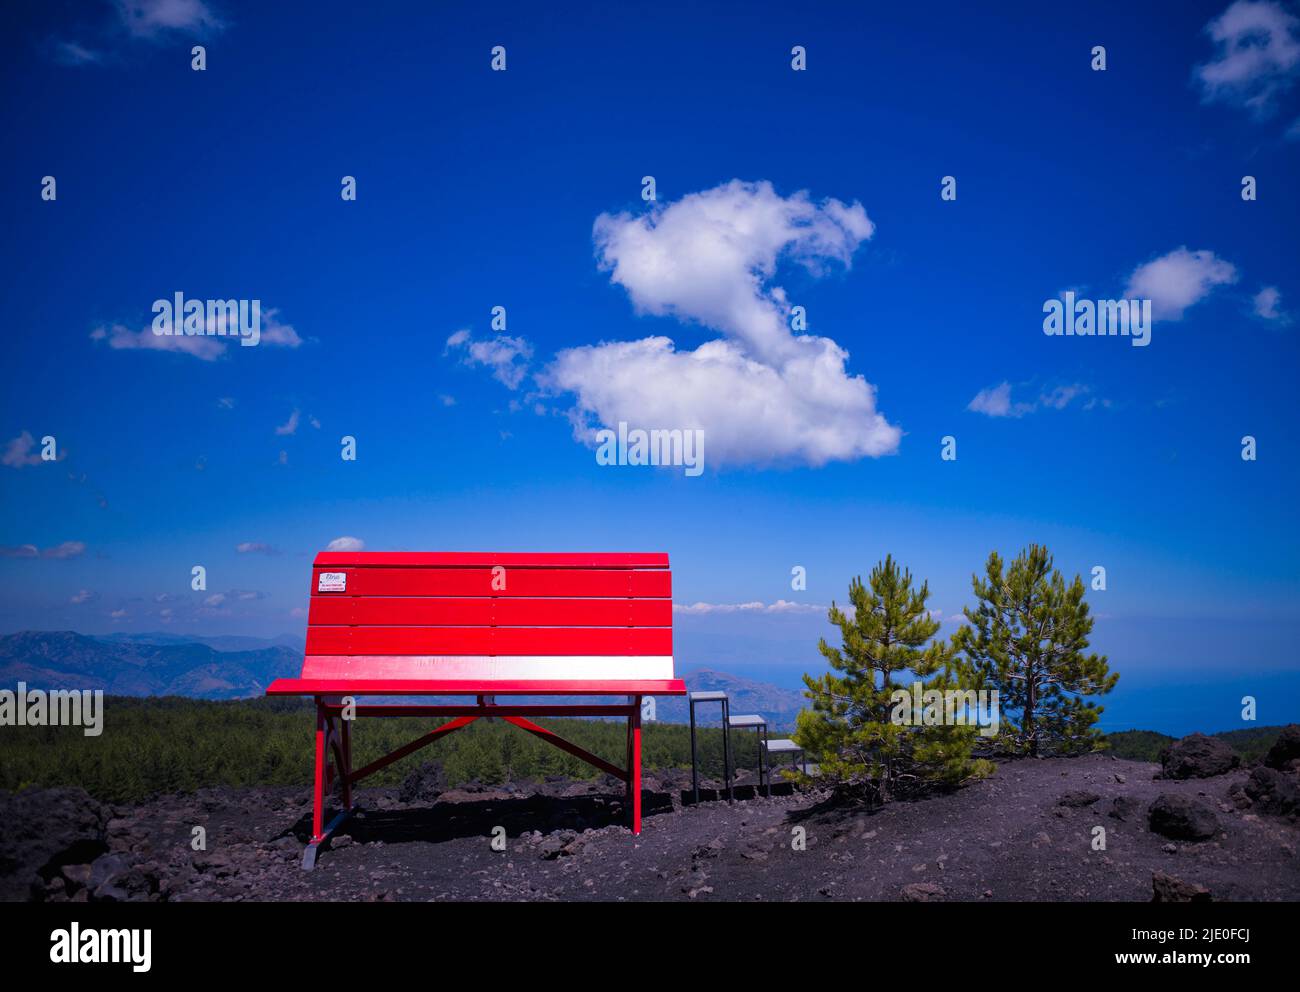 Giant Red Bench, Big Bench Community Project, Big Bench Number 200, Etna, Grande Panchina, Linguaglossa, Sicily, Italy Stock Photo